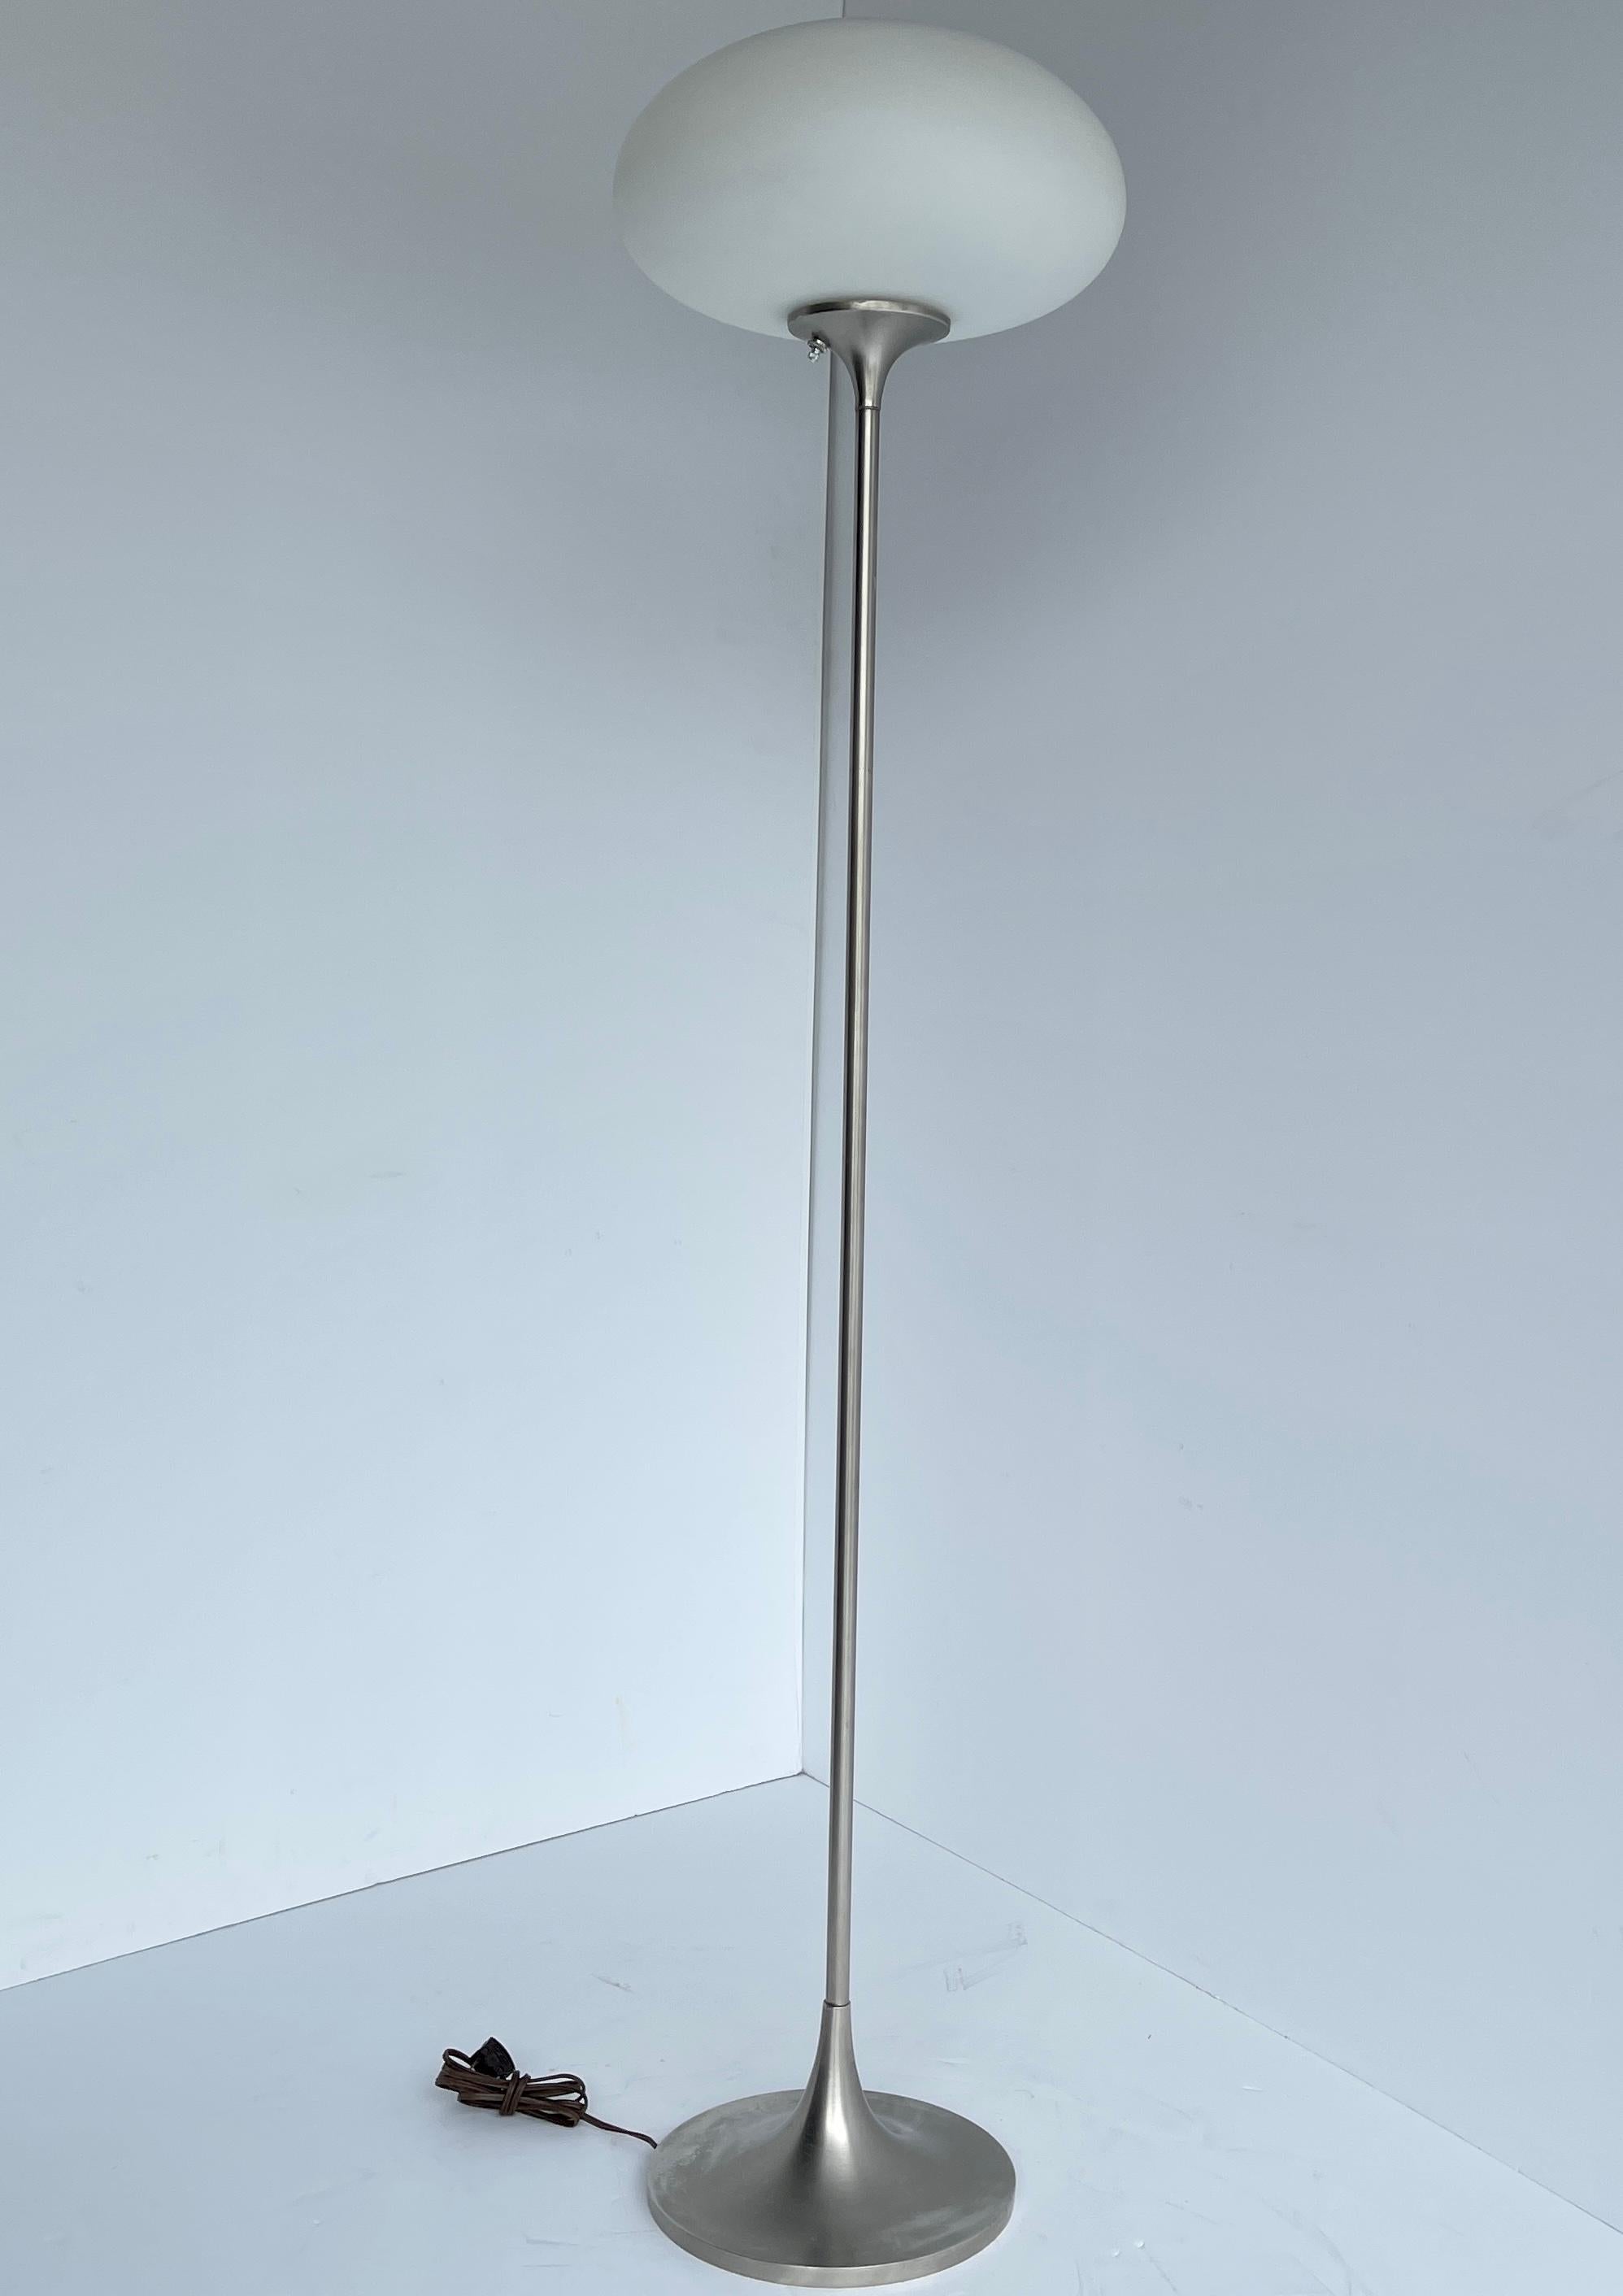 Mid-Century Modern mushroom floor lamp, marked 1973.
Classic and iconic mushroom floor lamp made by The Laurel Lamp Company of Newark, NJ. The brushed aluminum base and original frosted hand blown glass shade are a perfect example of the high